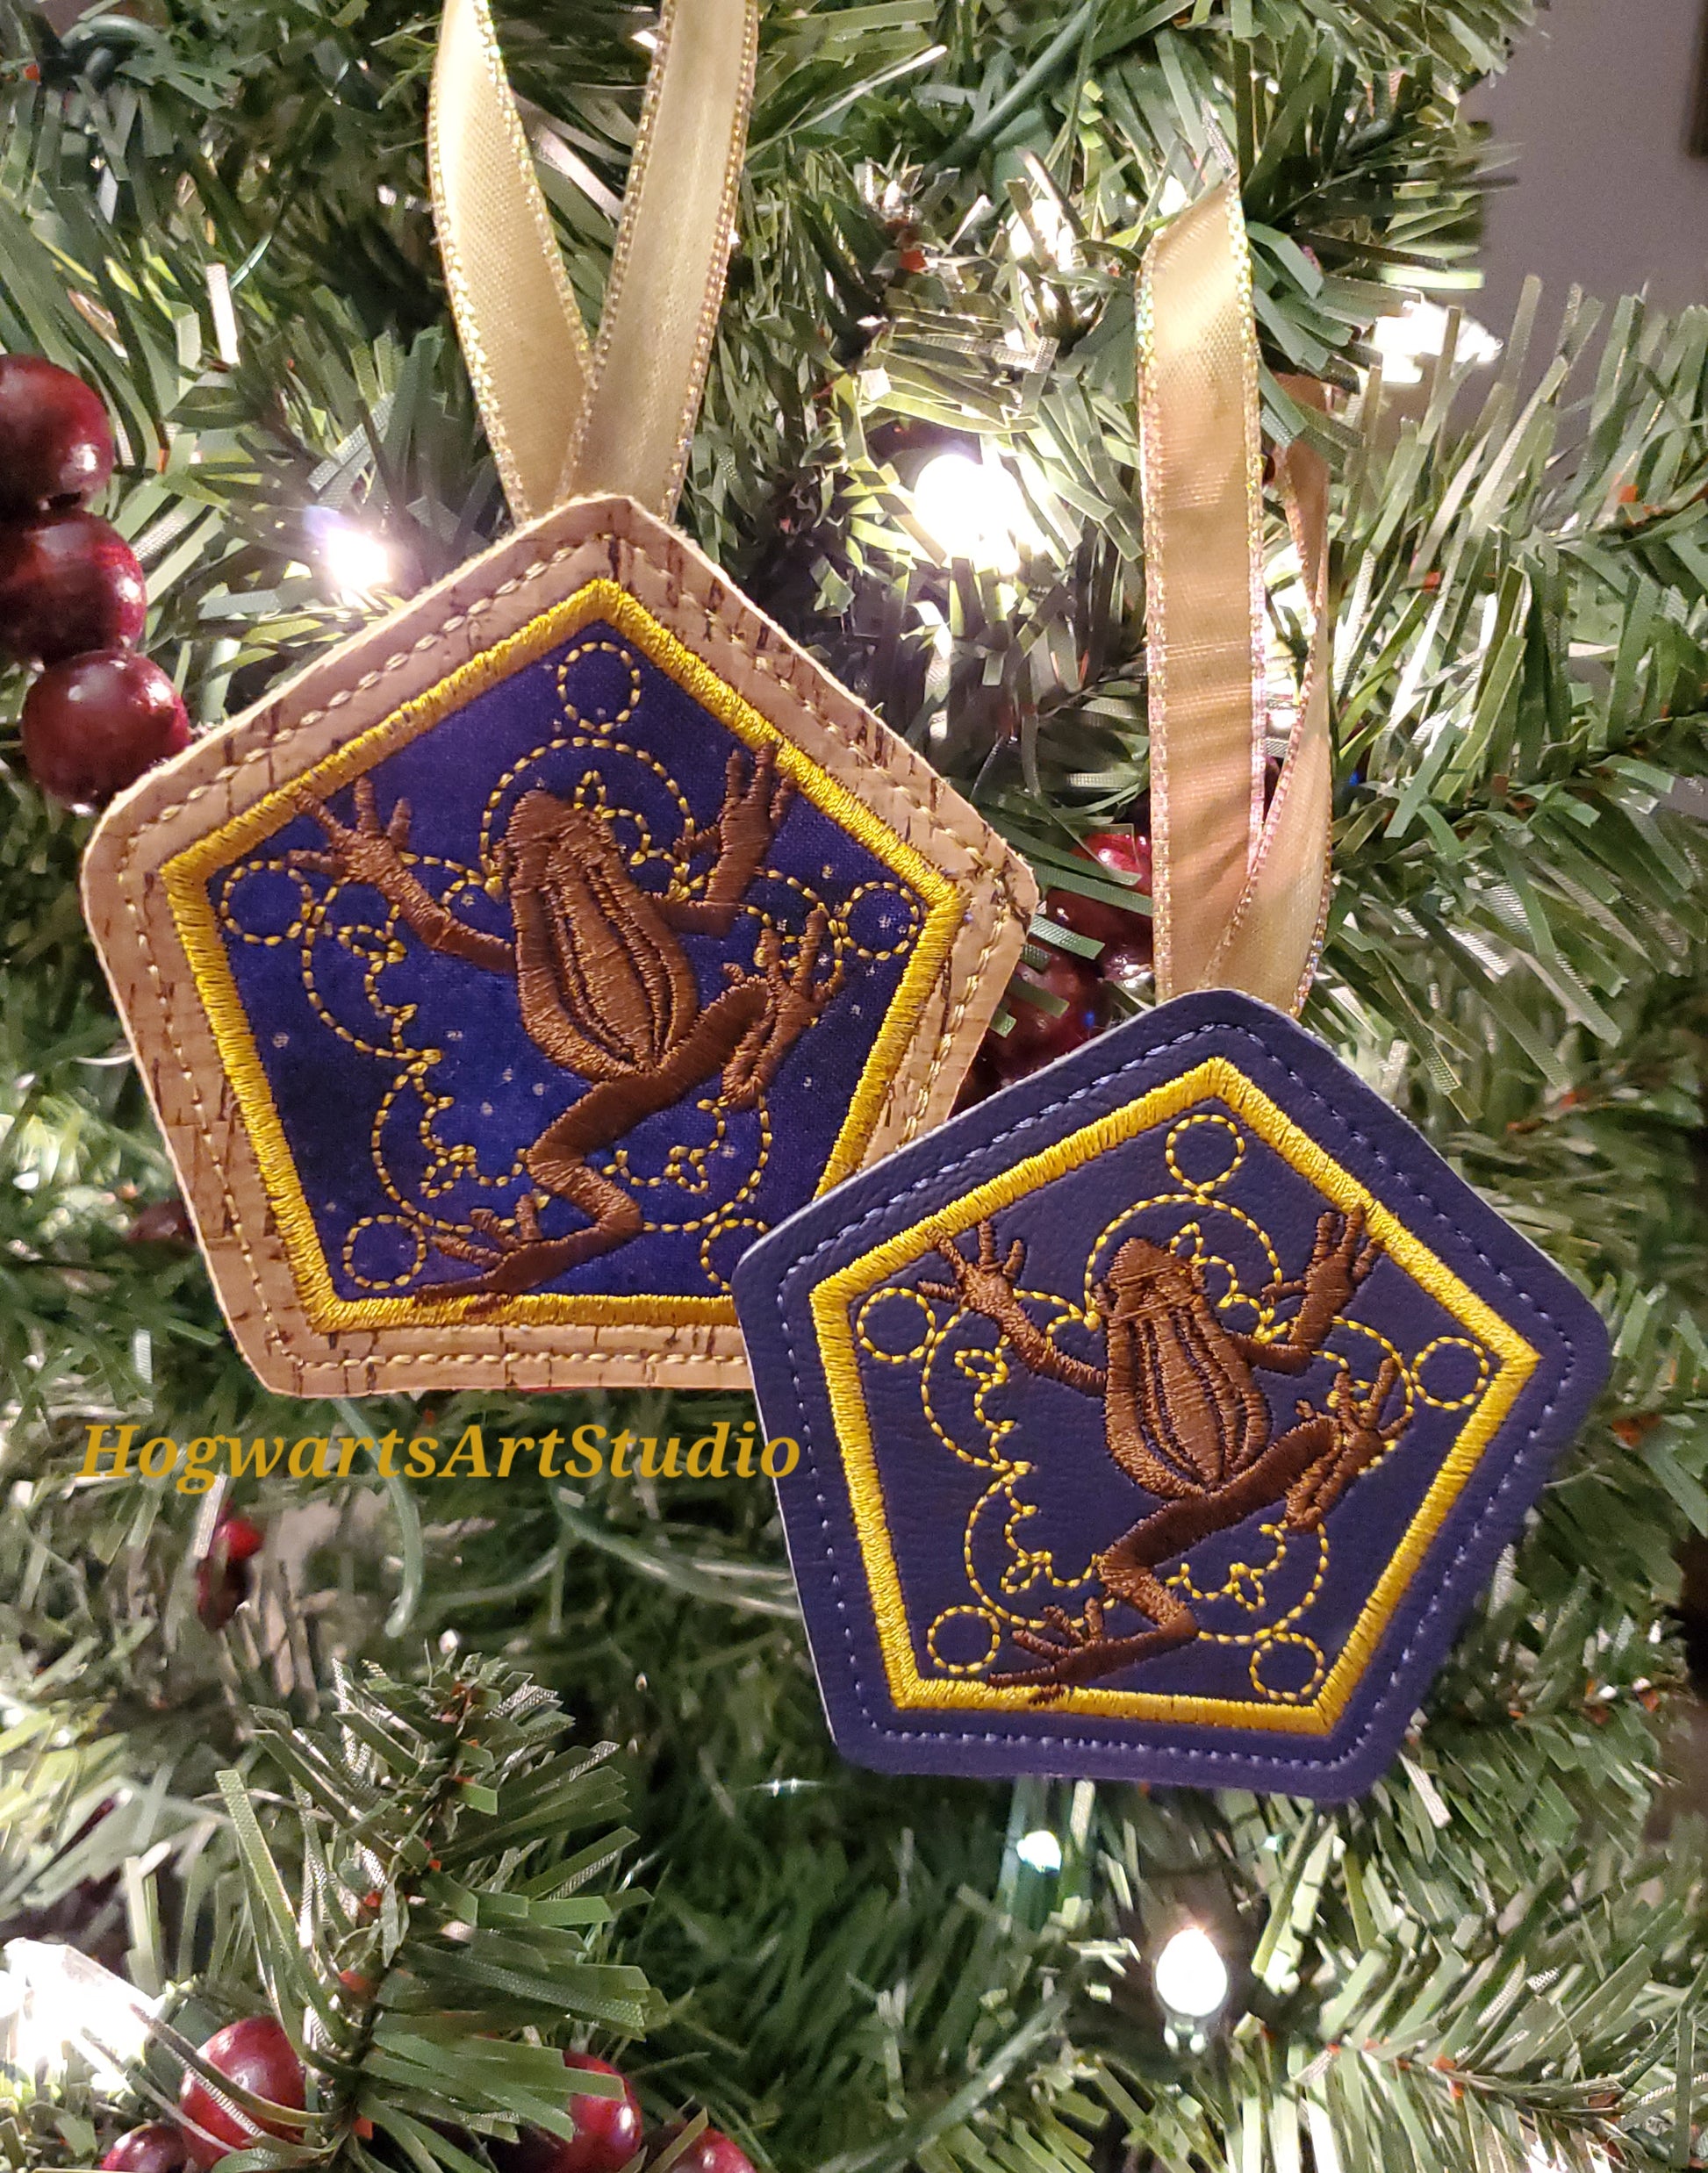 two purple frog ornaments on a tree